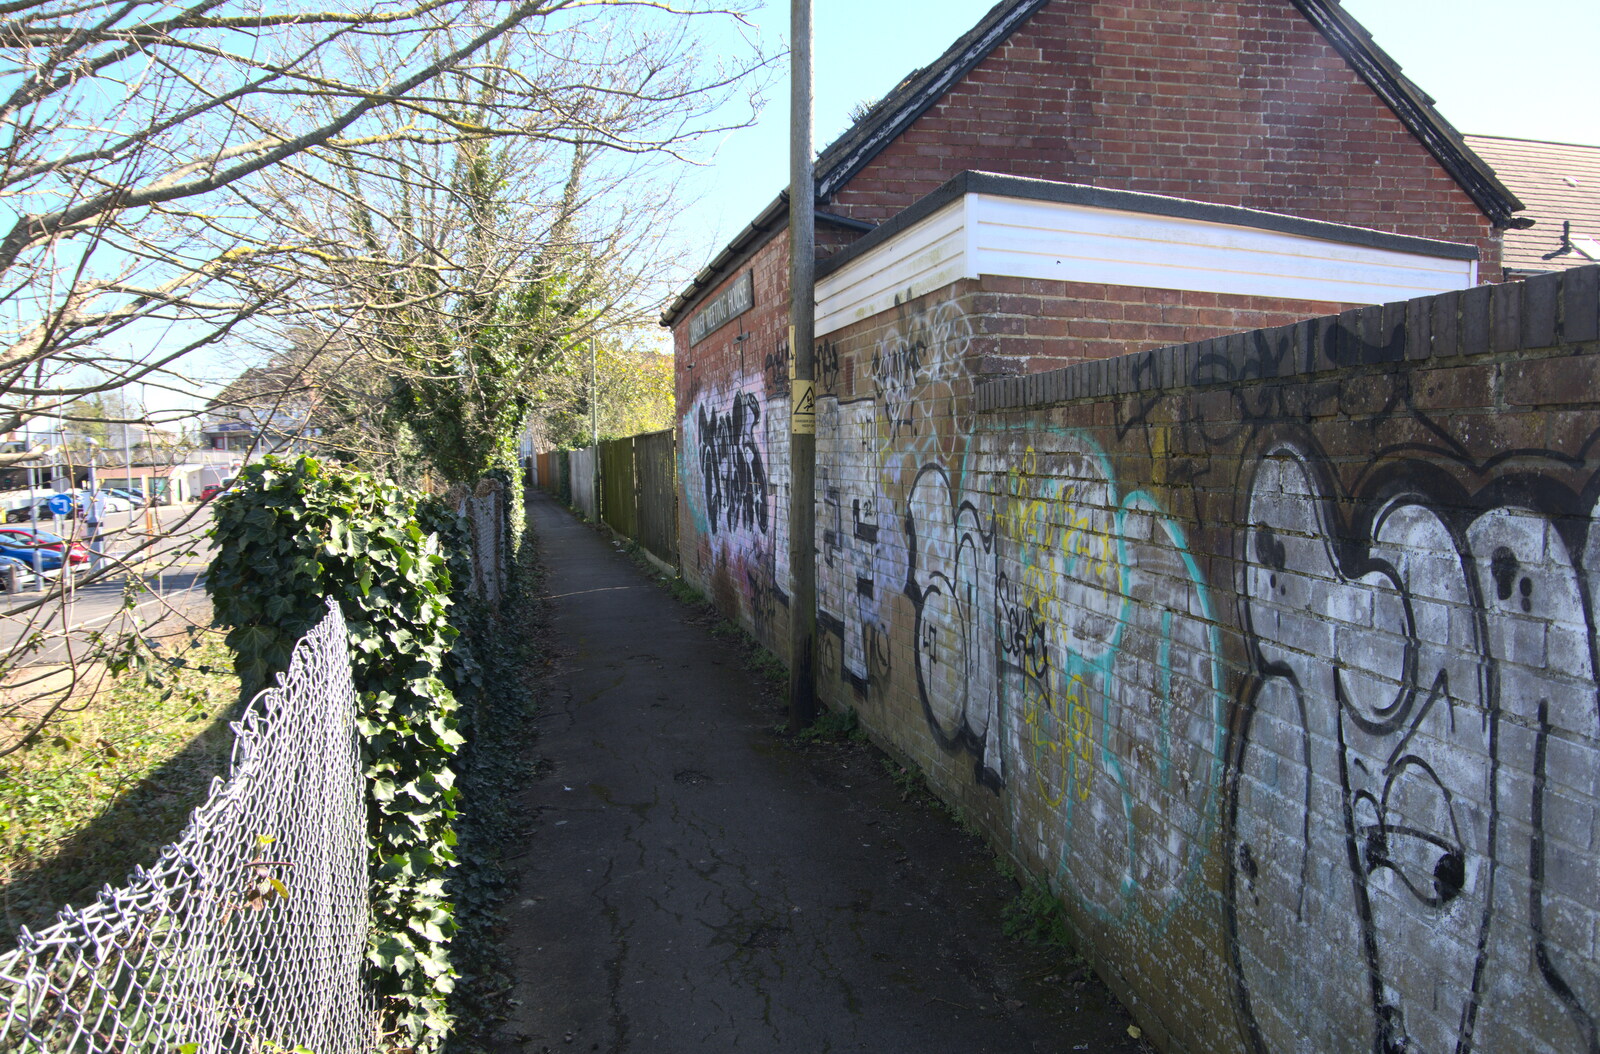 Graffiti on the old Quaker Meeting House from A Day in New Milton, Hampshire - 3rd April 2023